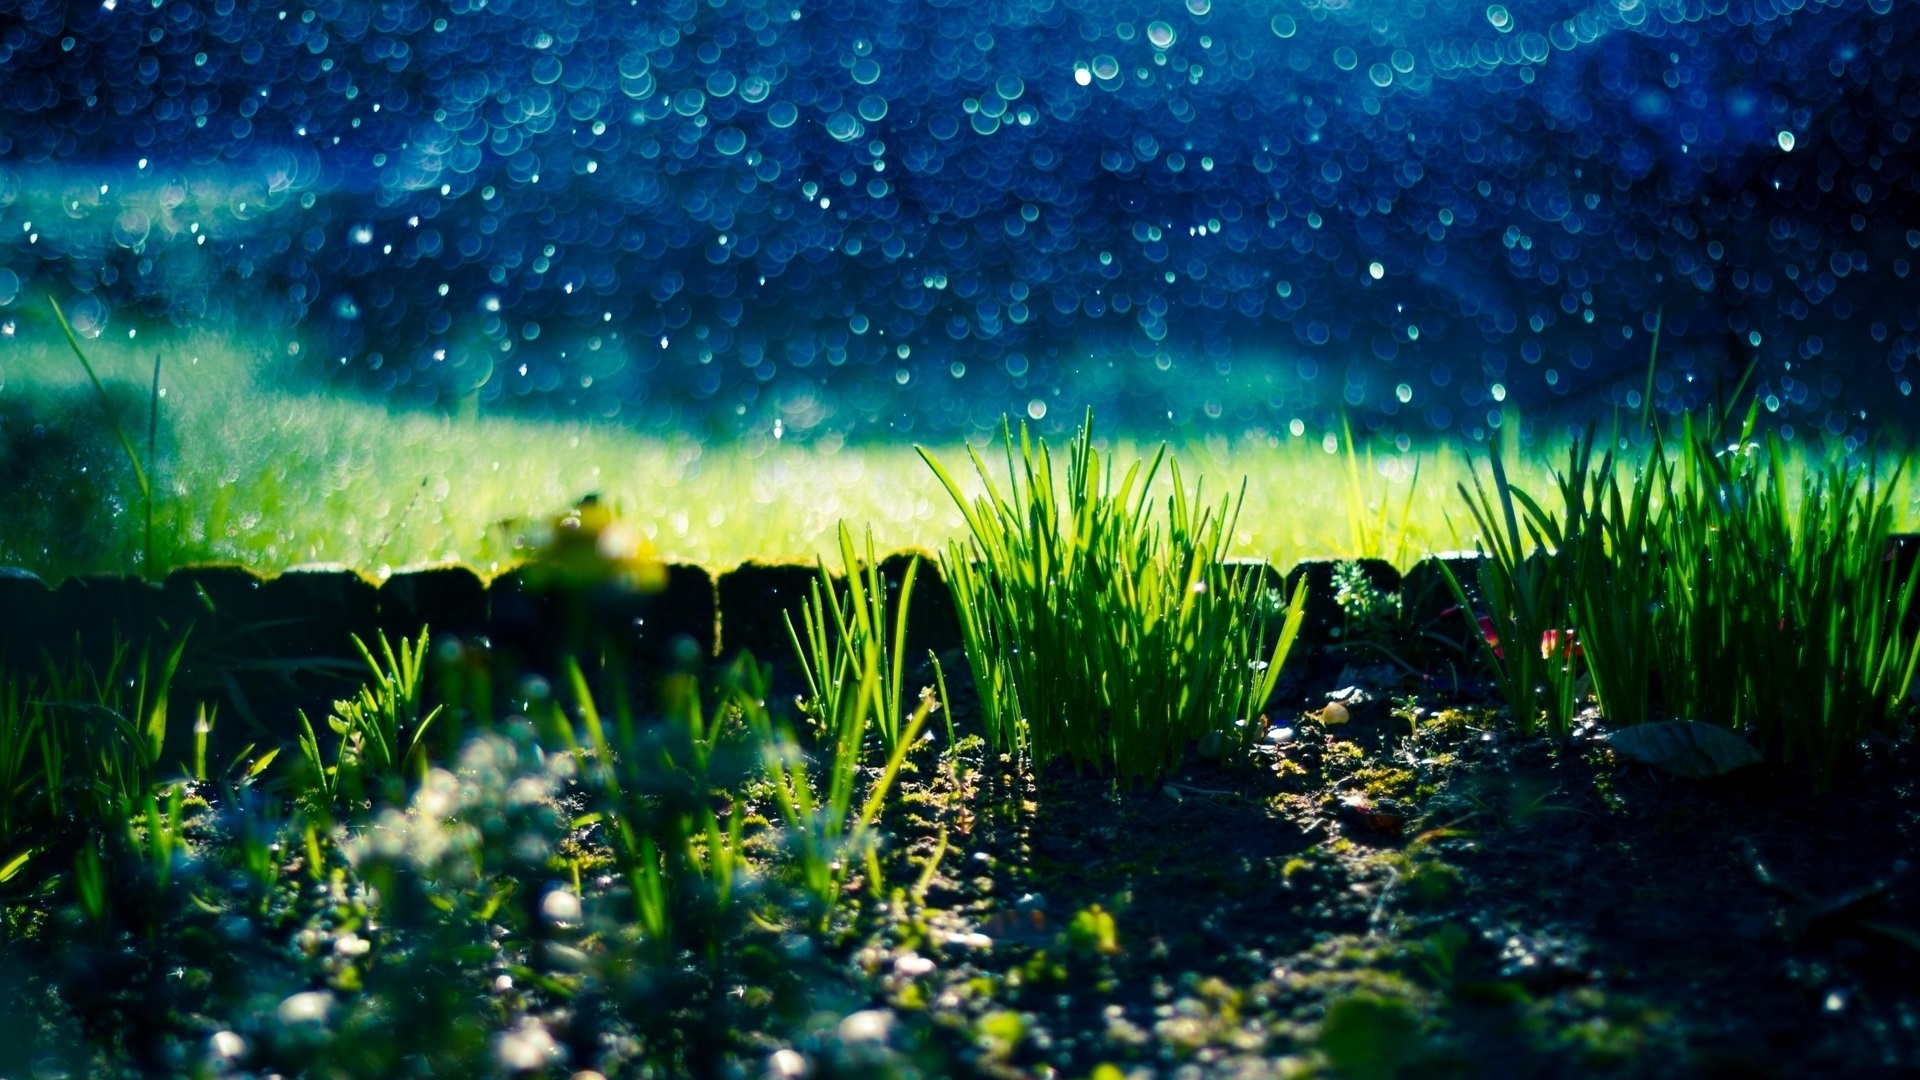 General 1920x1080 grass nature plants water drops